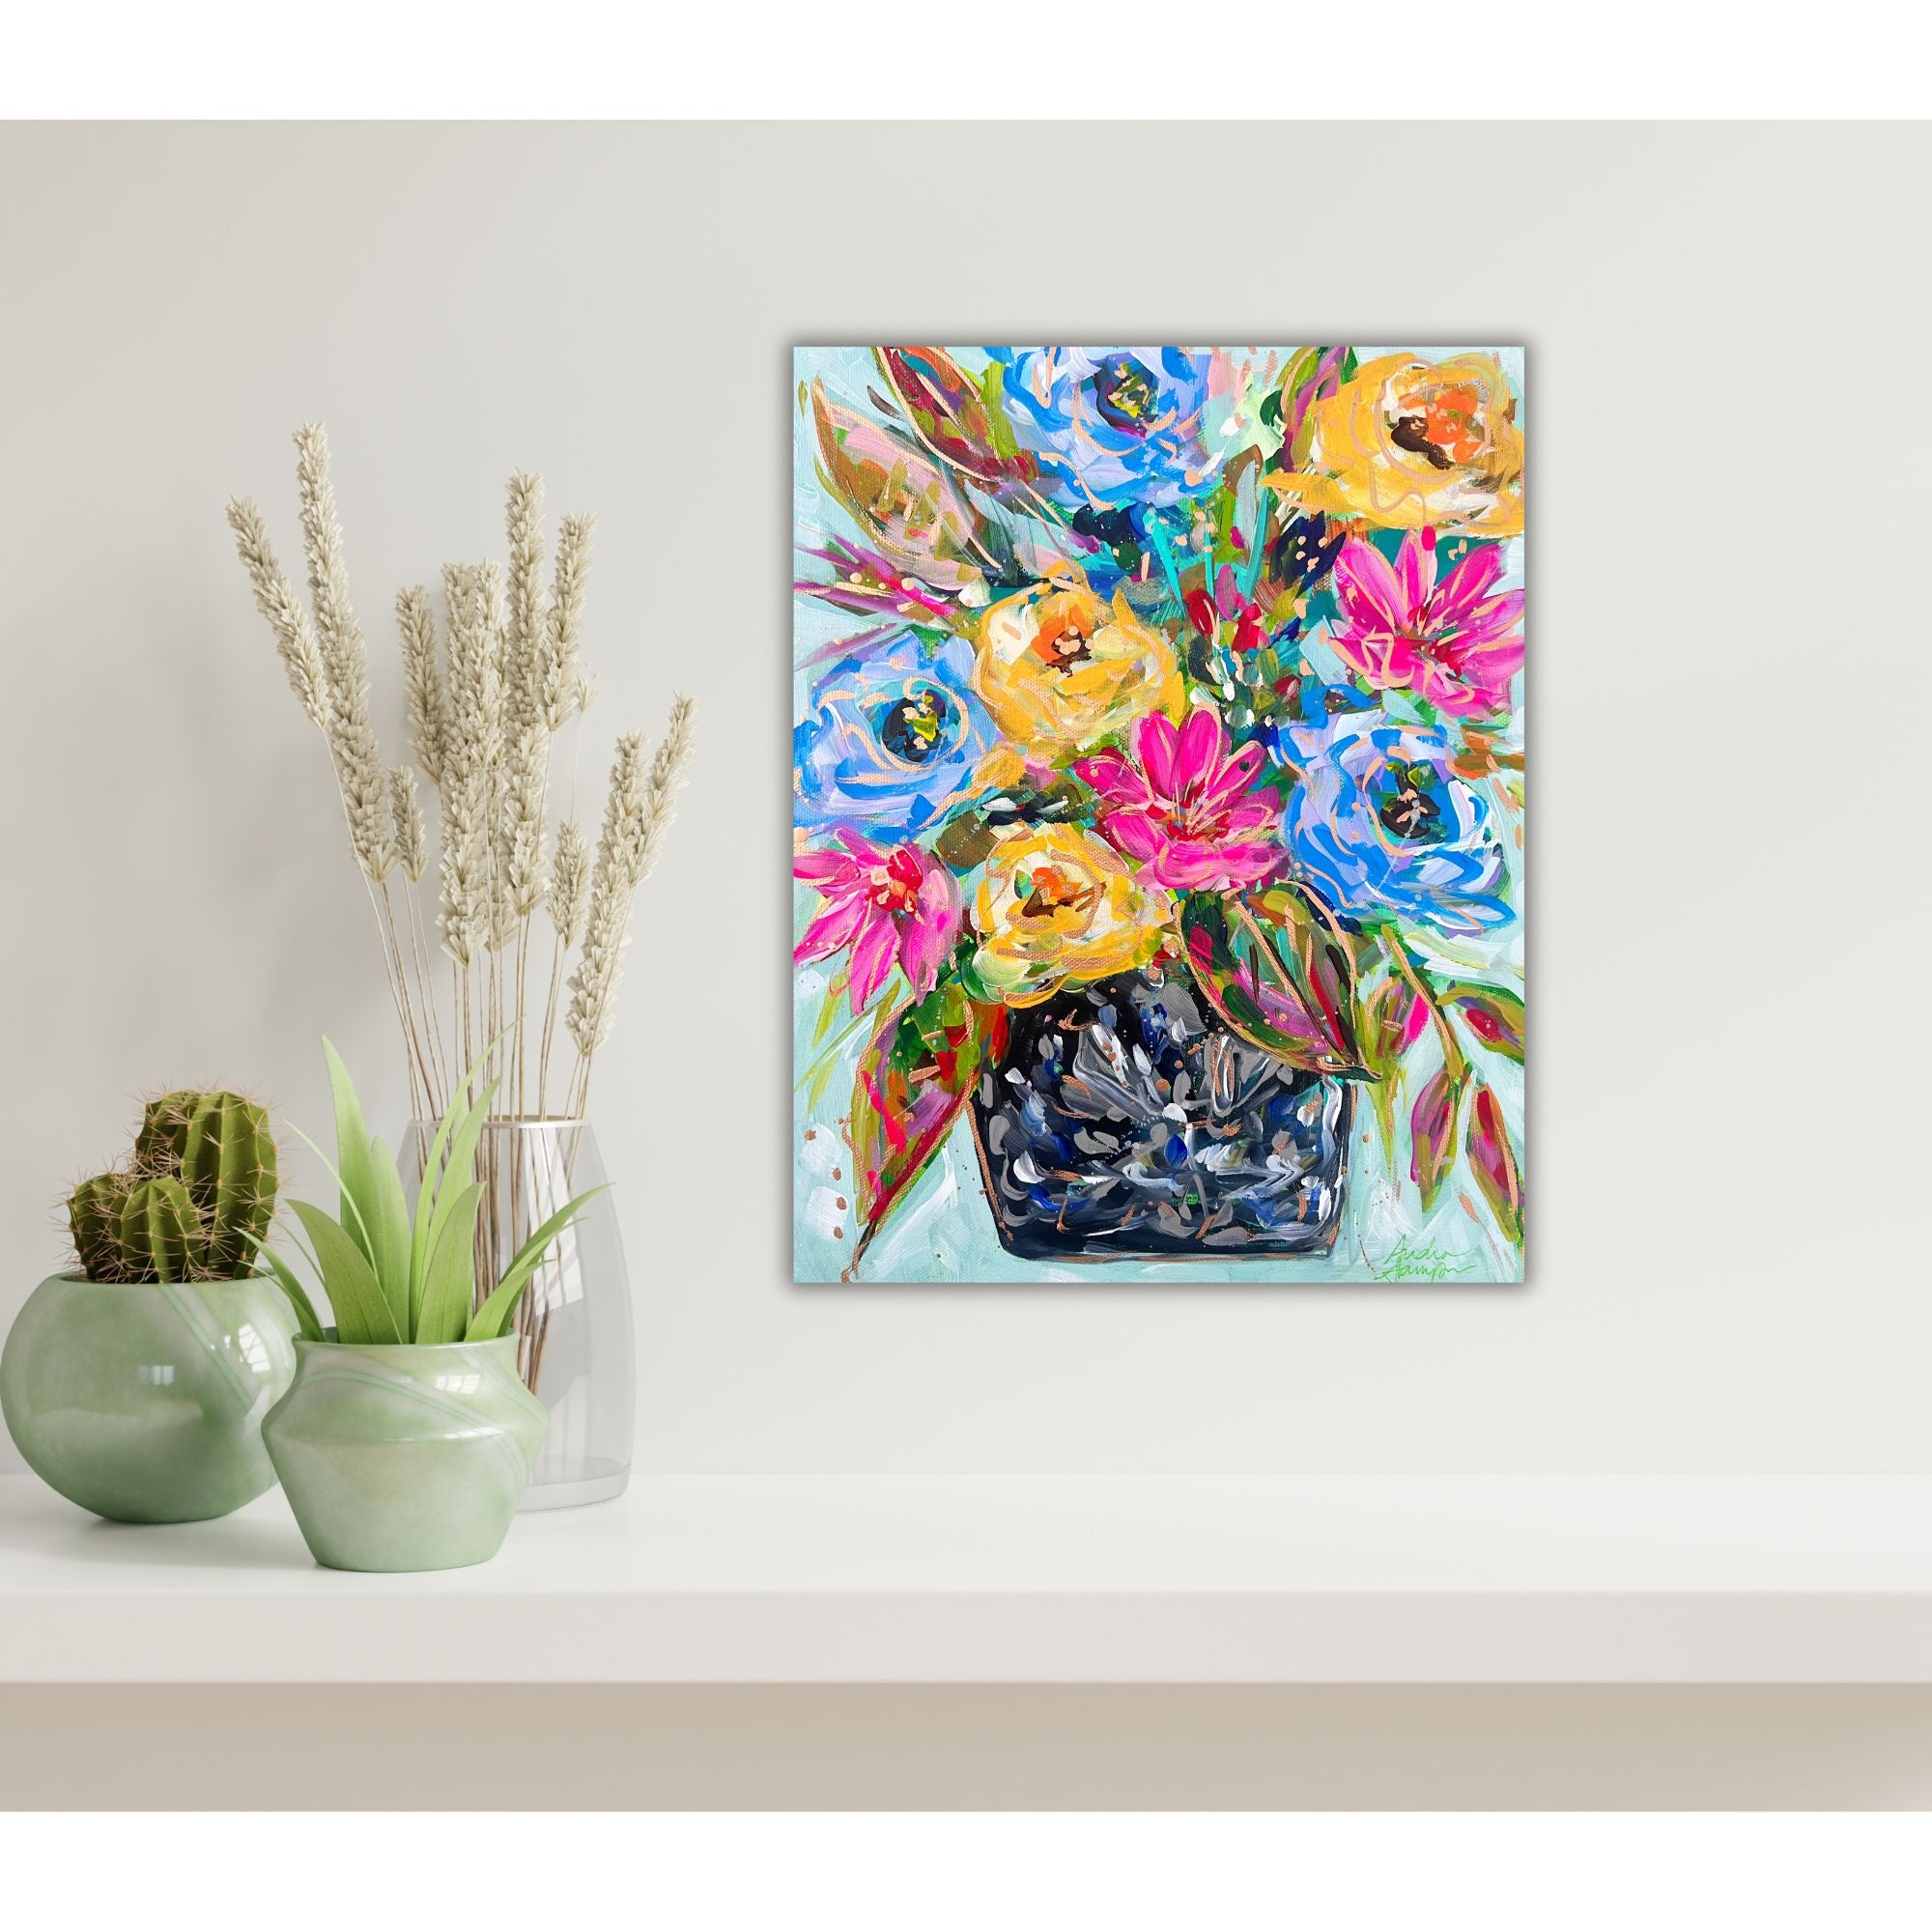 Colorful Bouquet in Black and White Vase 11x14" Original Painting on Canvas